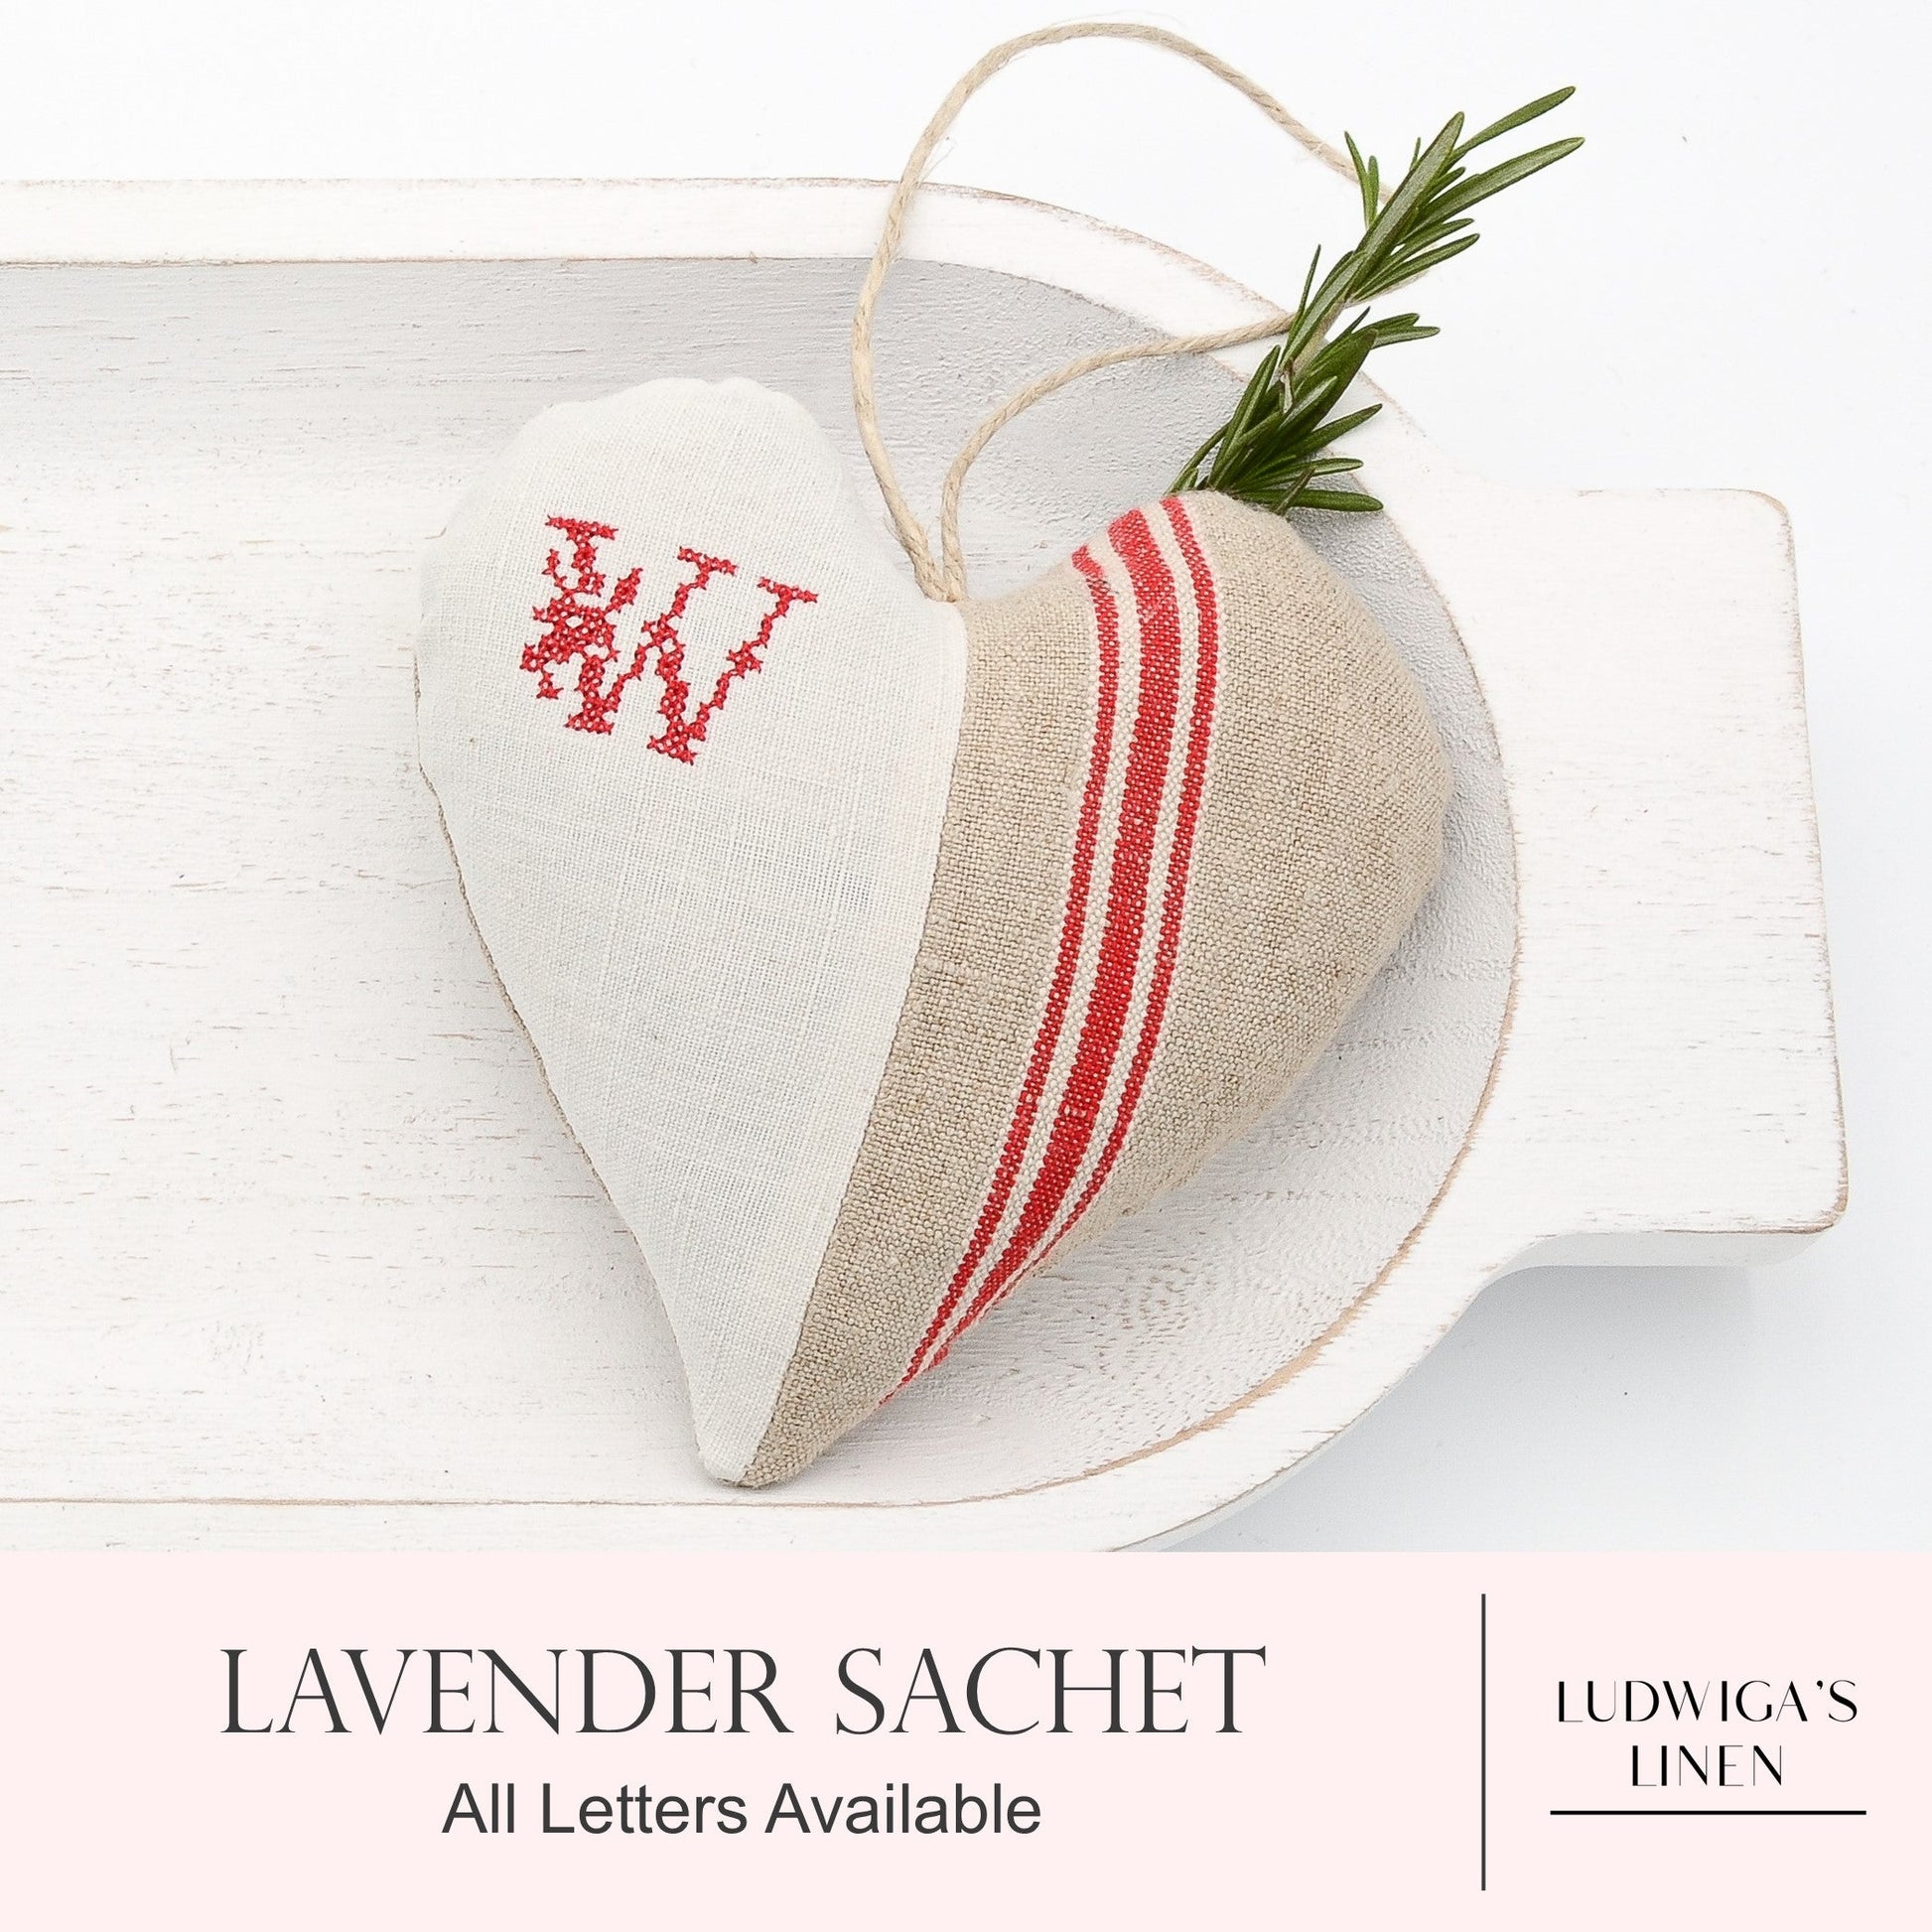 Antique/vintage French/German linen and red-striped mangle cloth linen lavender sachet heart with monogram, hemp twine tie and filled with high quality lavender from Provence France